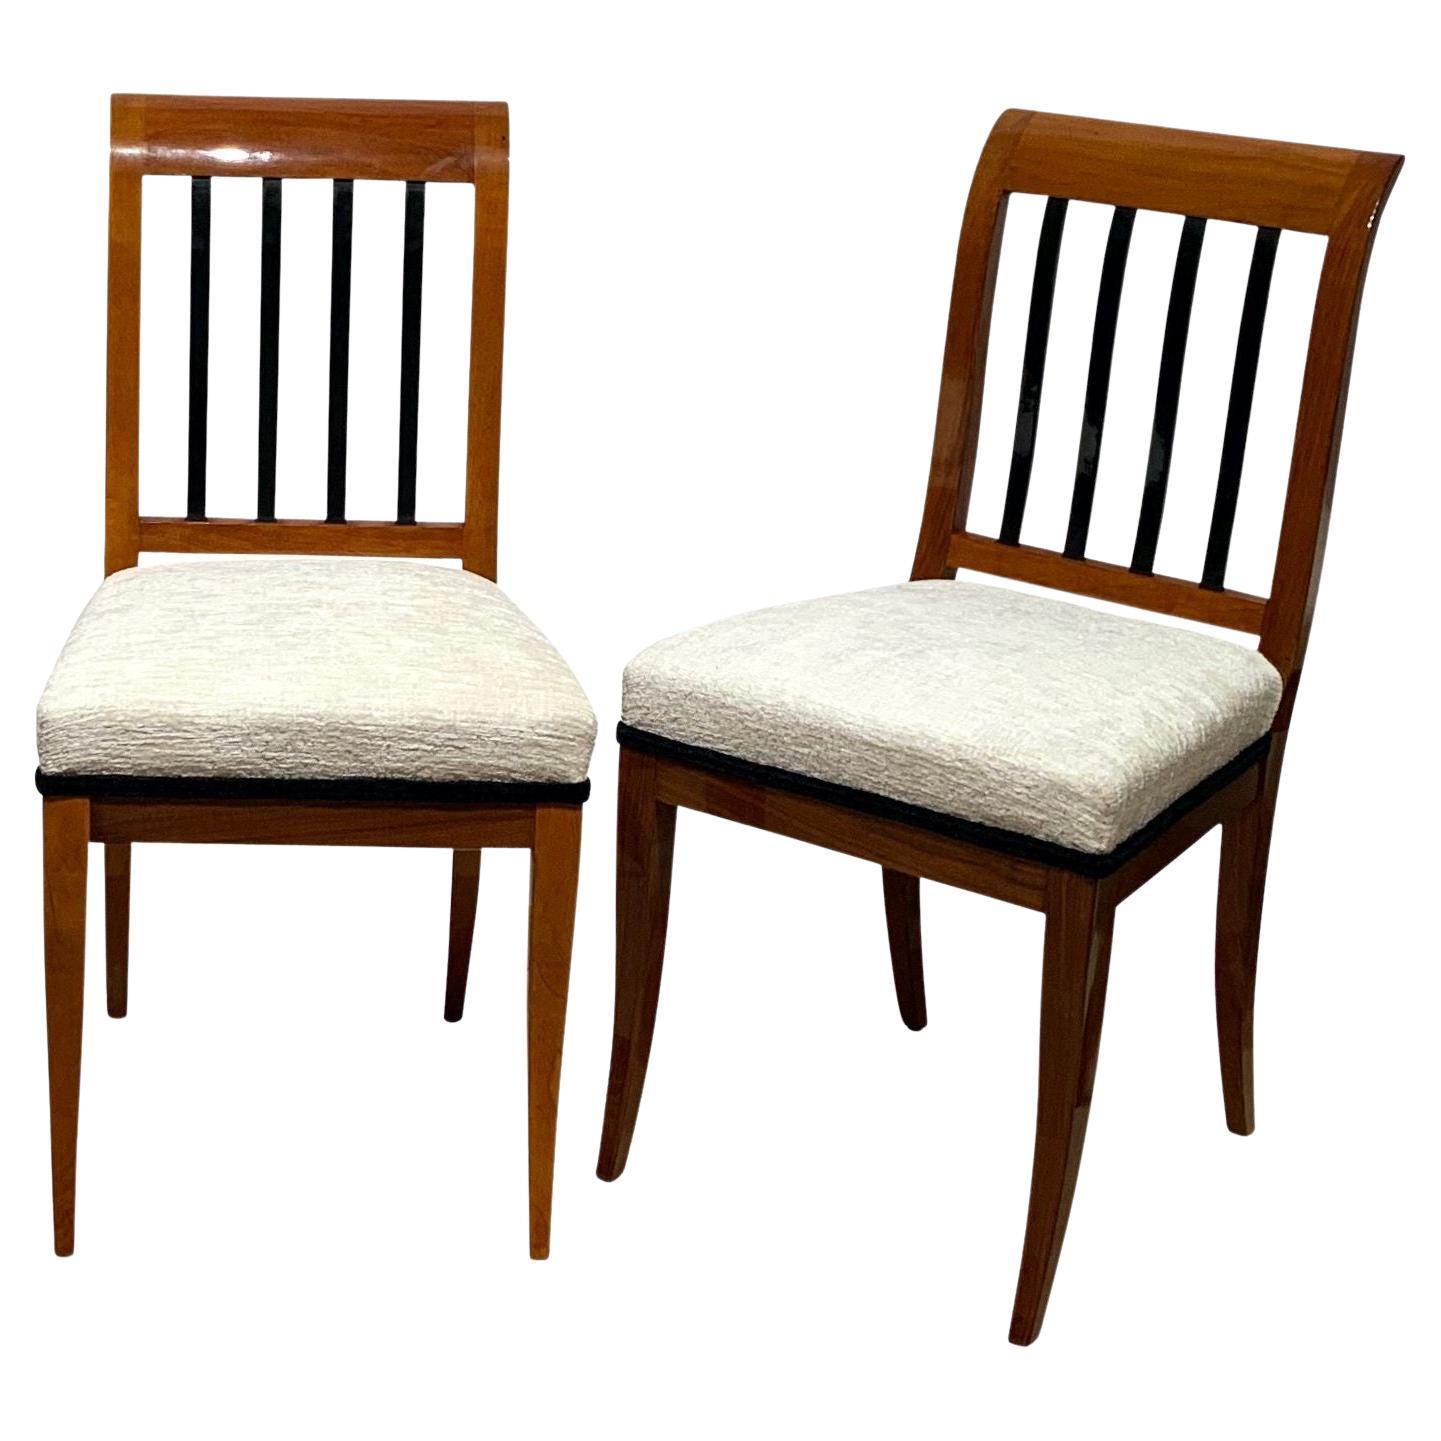 Elegant pair of Biedermeier chairs from Franconia, Germany around 1825.
* Solid walnut, hand-polished shellac.
* Four ebonized sprouts in the back.
* Cream-colored velvet fabric with black double keder.
Dimensions: H 90 cm, S-H 49 cm, W 46 cm, D 54